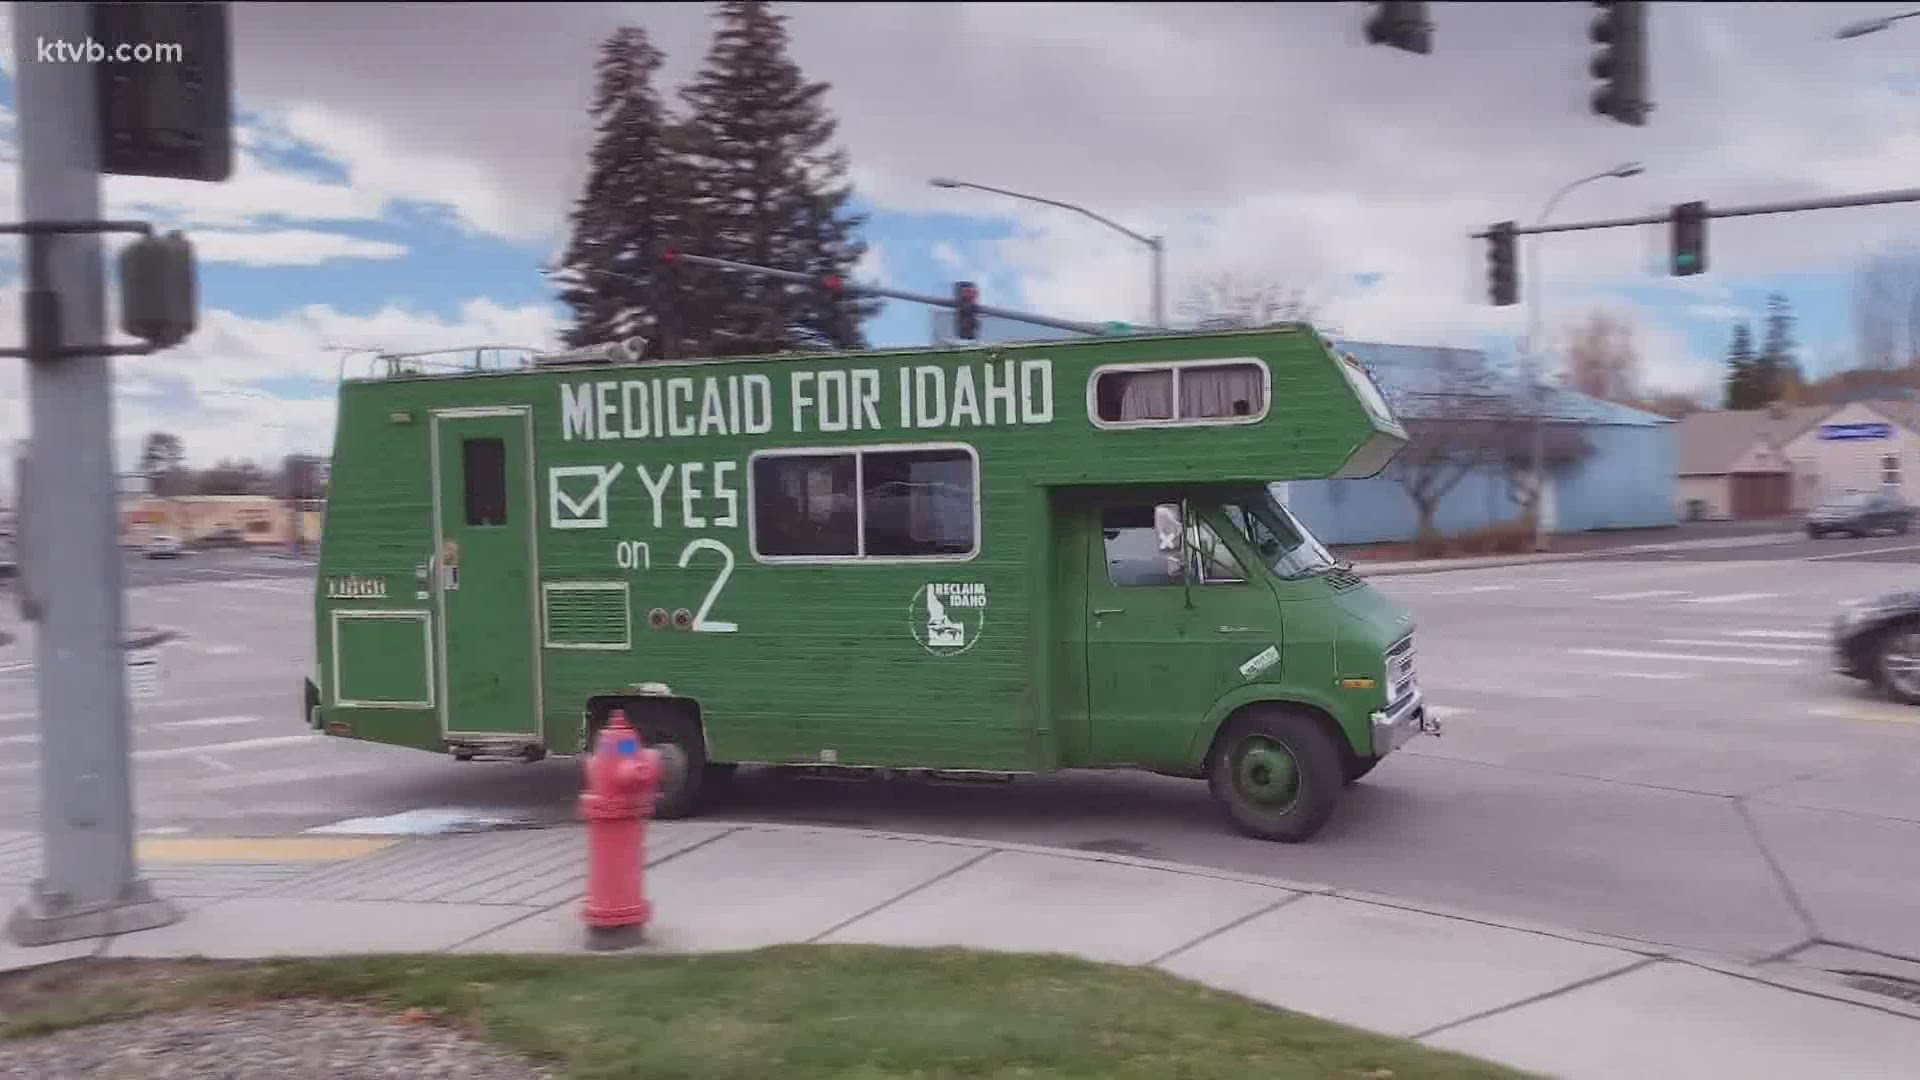 Reclaim Idaho is taking their challenge to the Idaho Supreme Court saying the law is unconstitutional.